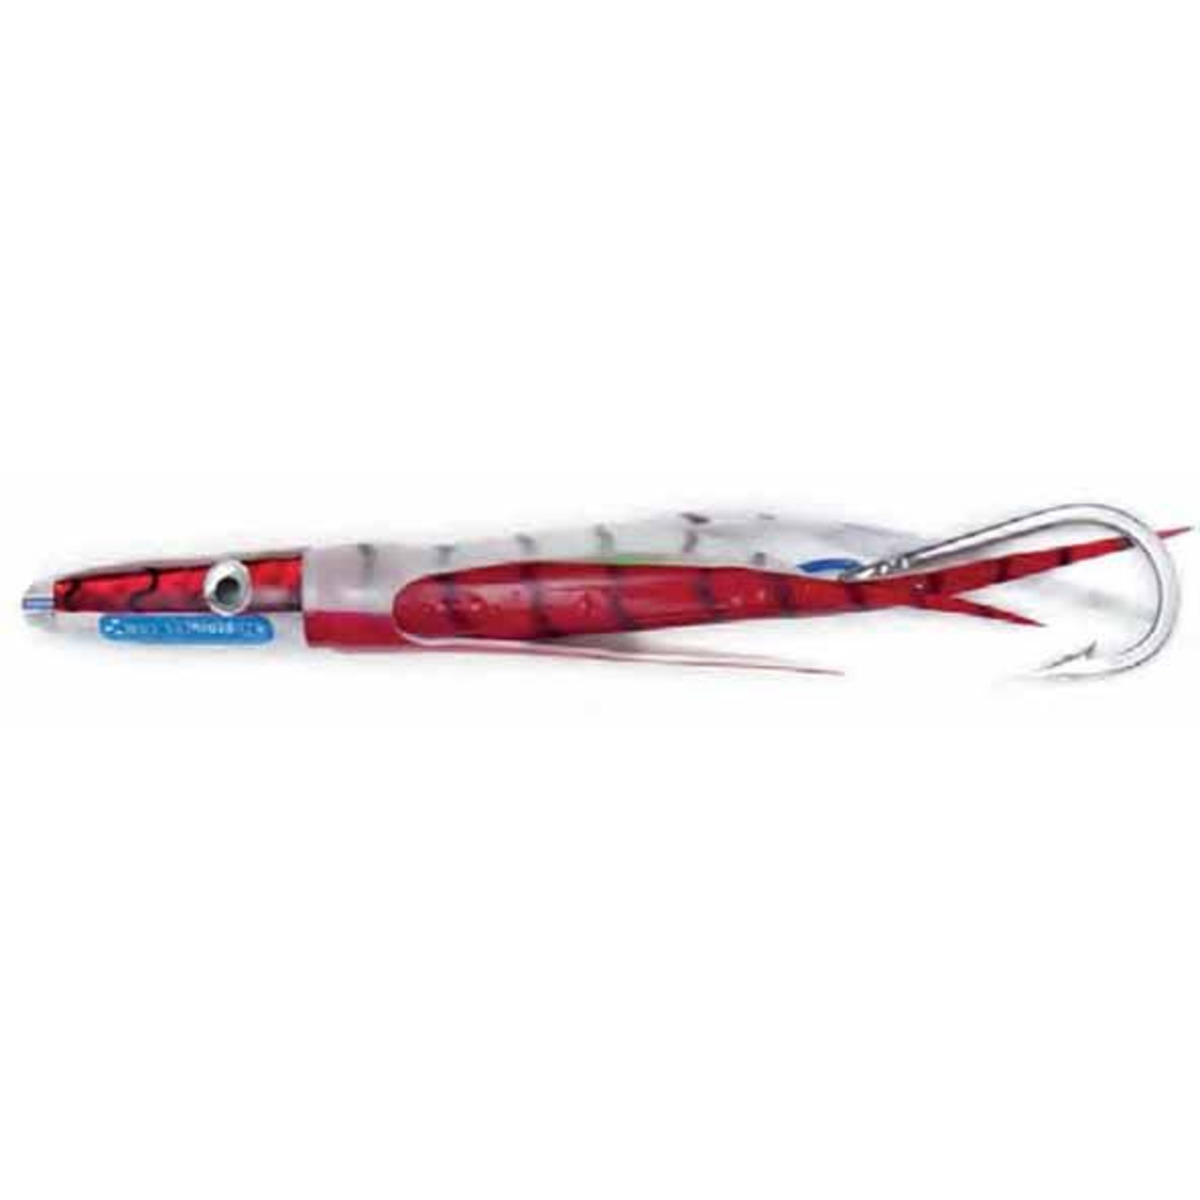 H2o Pro Shallow Tail - Red White - 19 cm